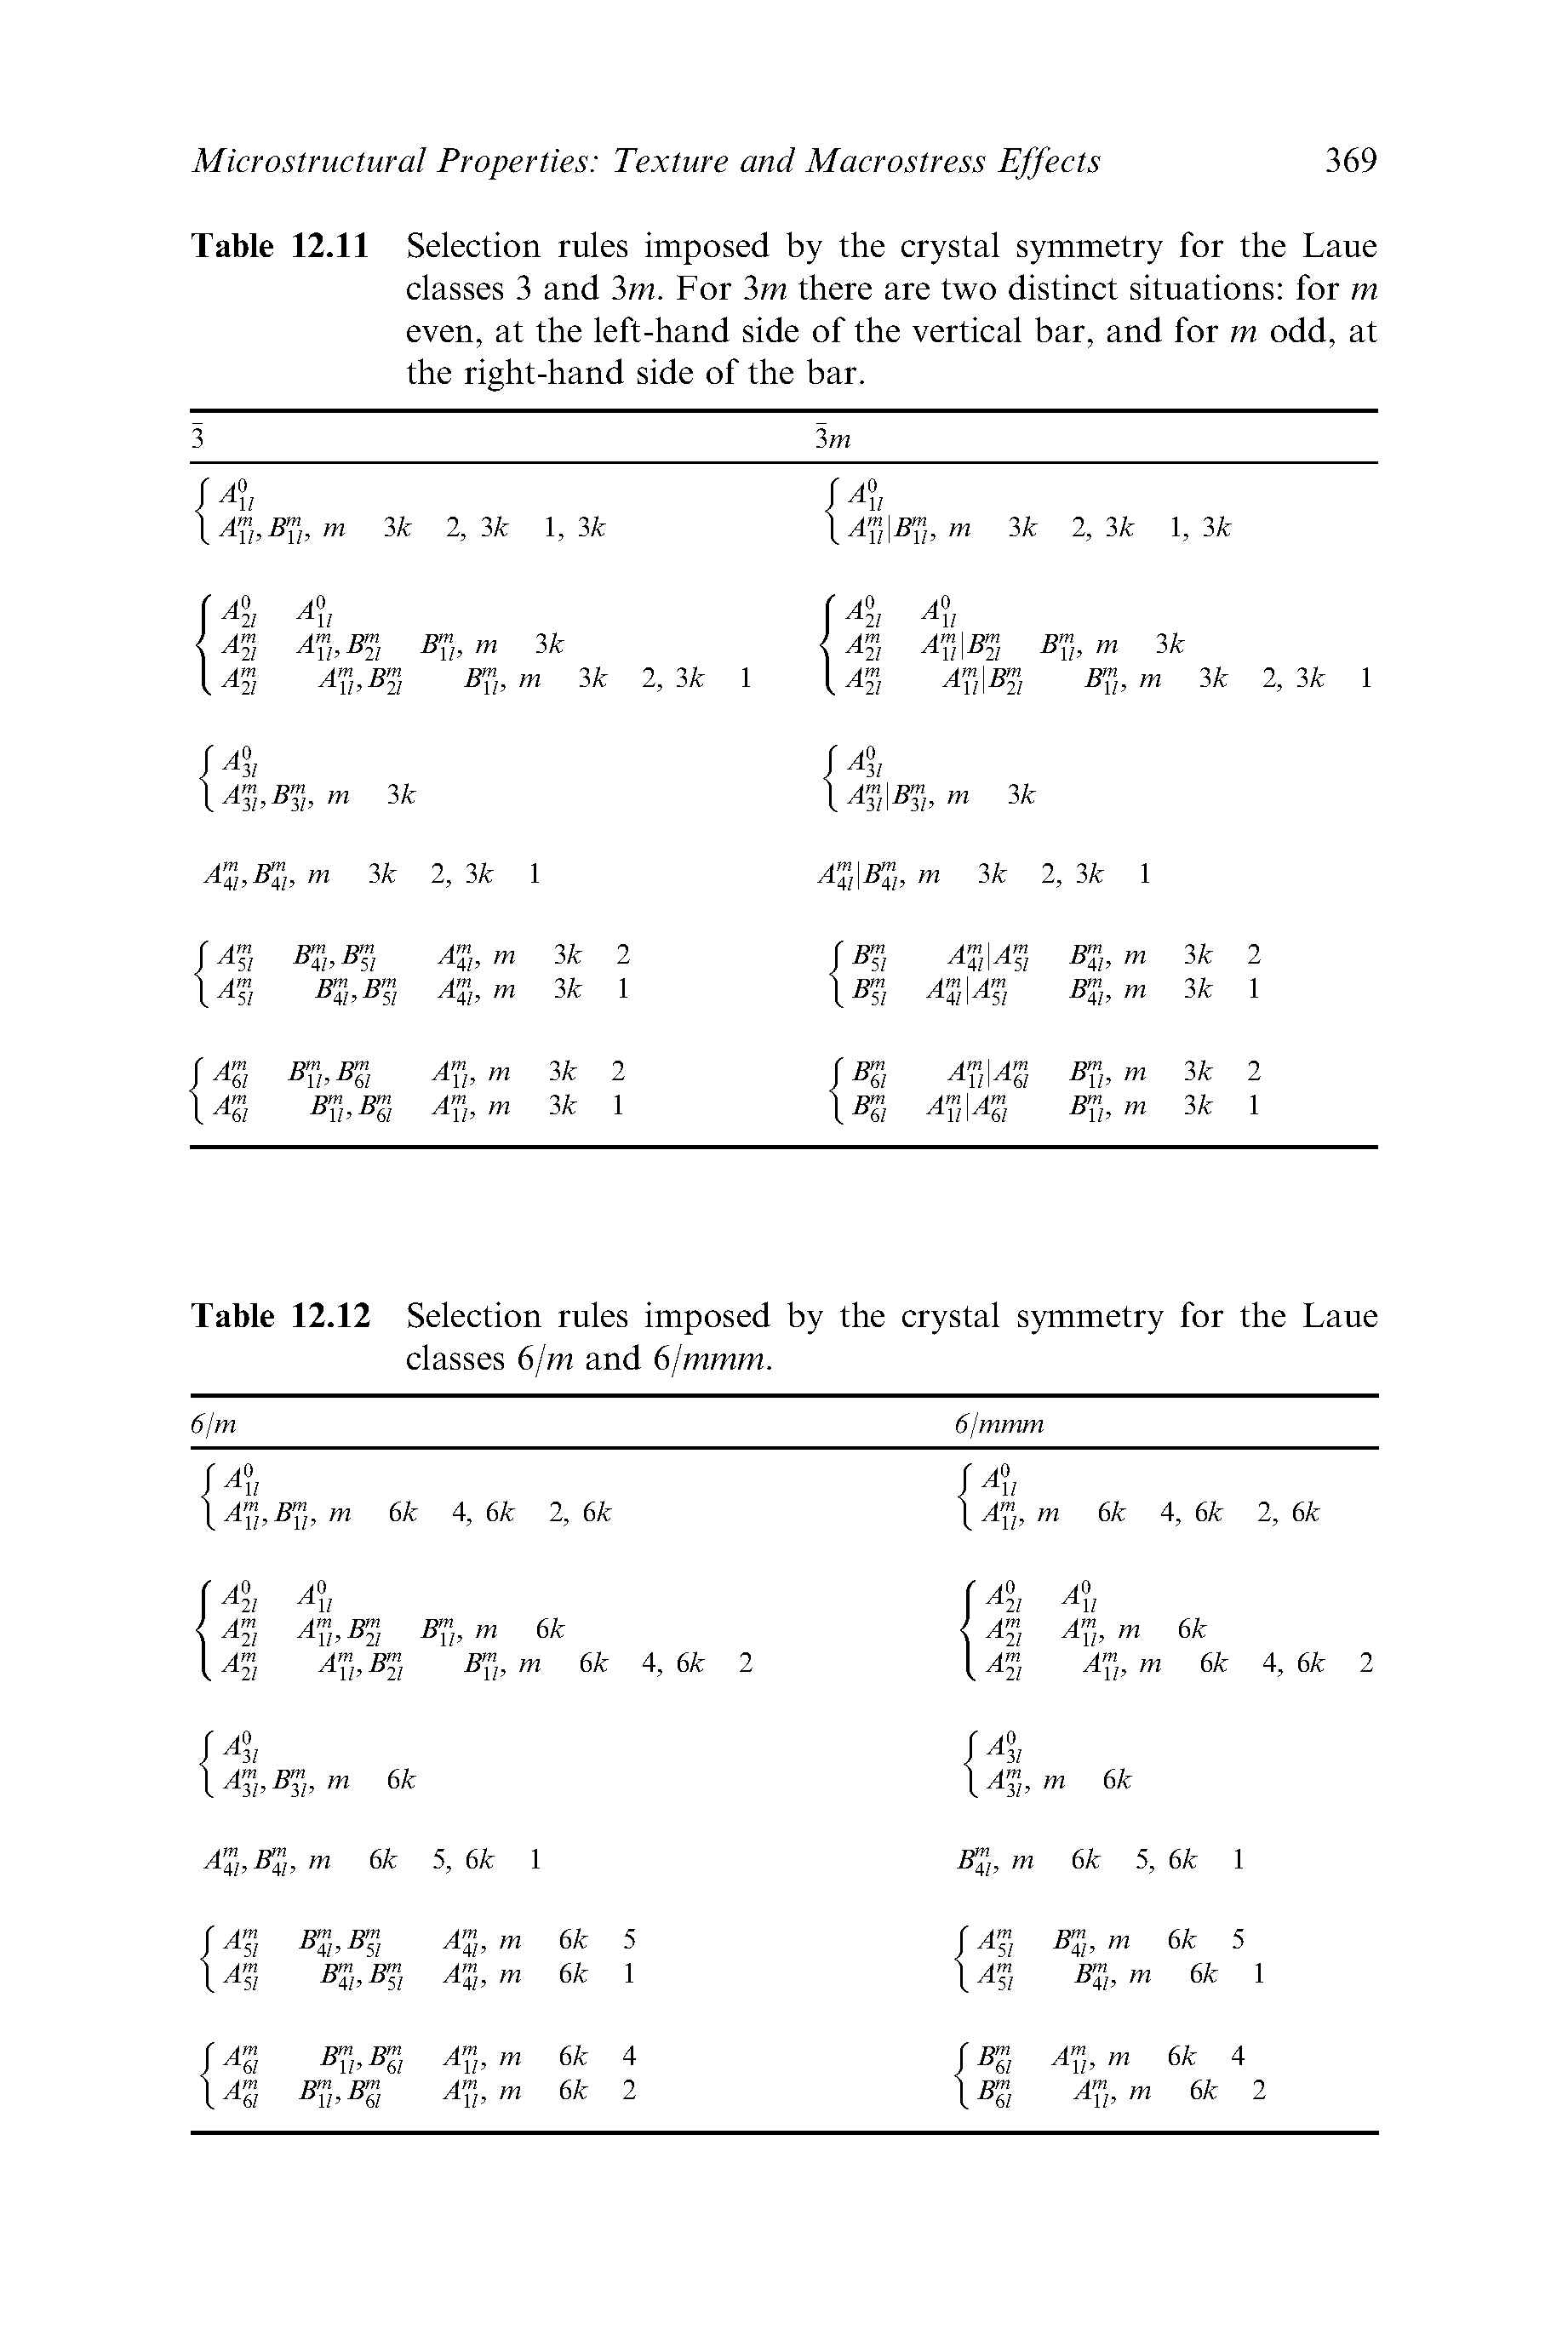 Table 12.12 Selection rules imposed by the crystal symmetry for the Laue classes 6/m and 6/mmm.